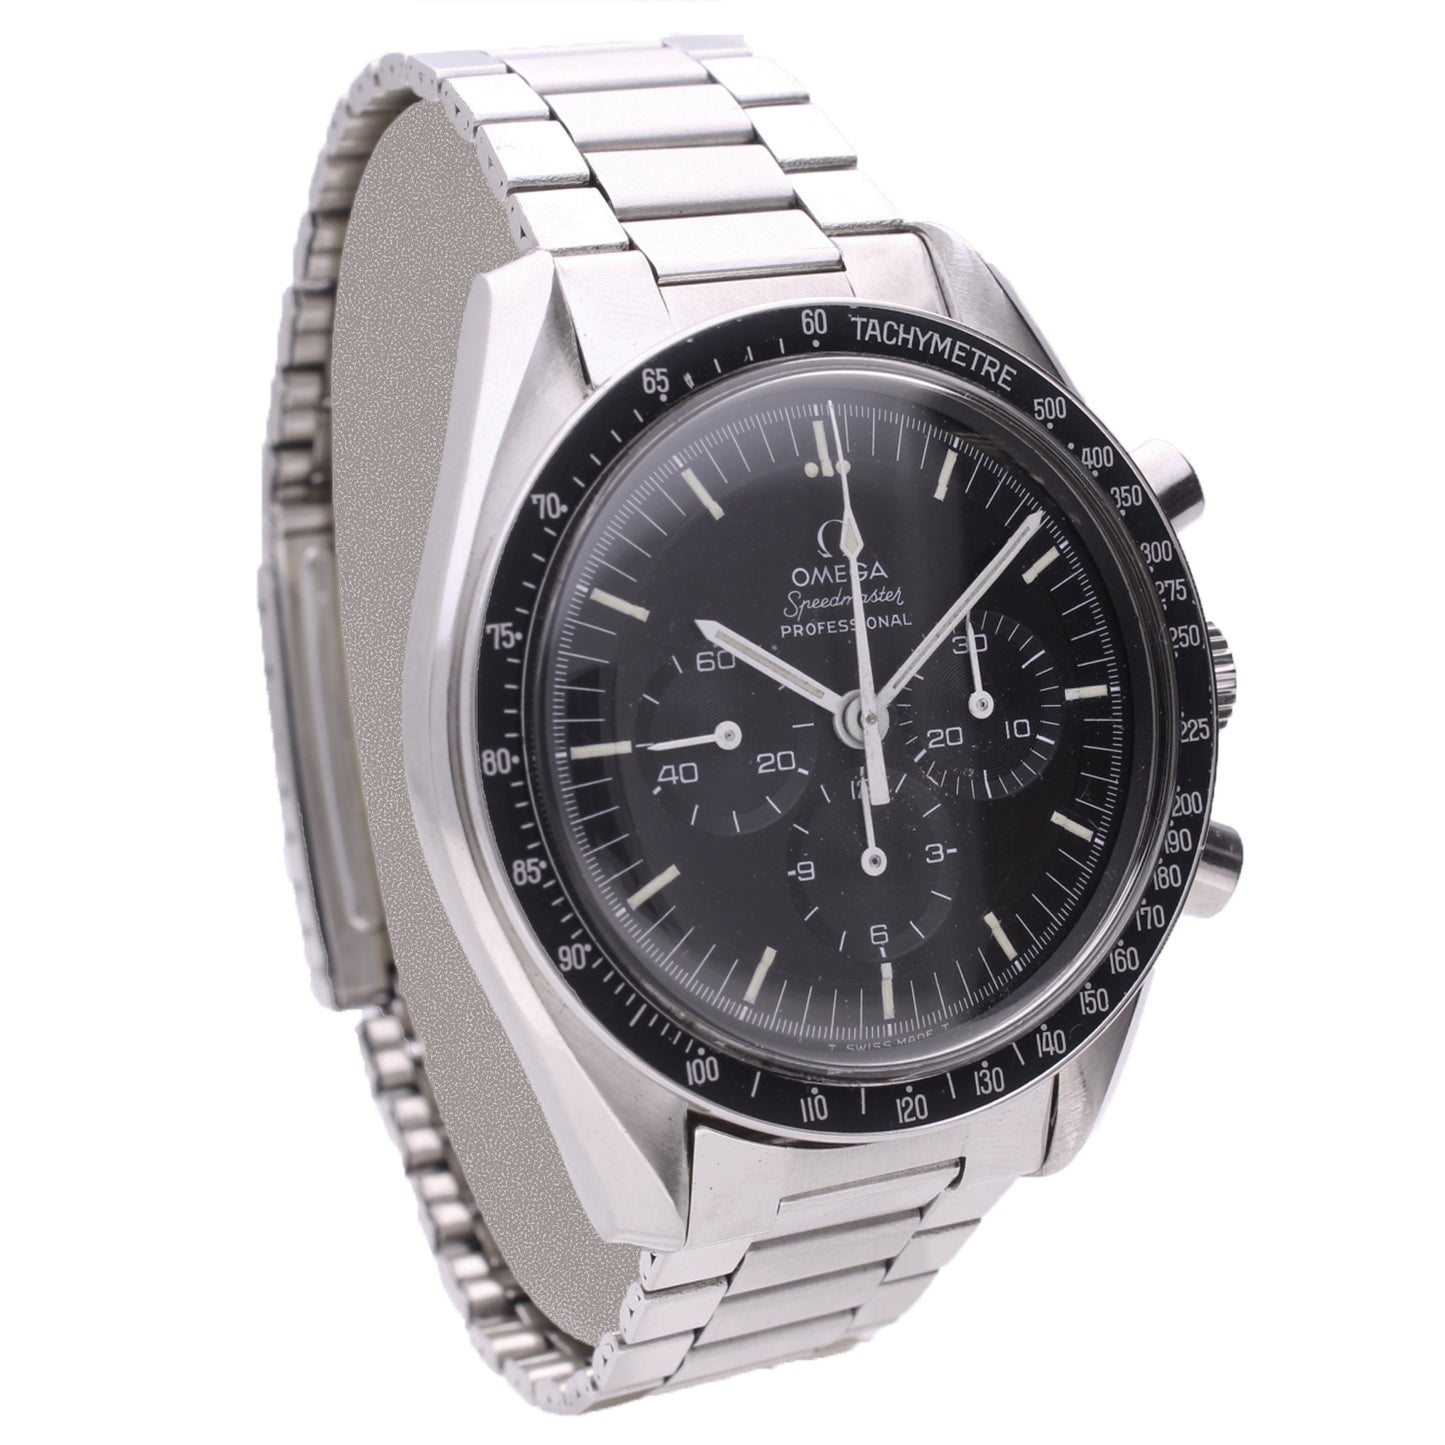 Stainless steel OMEGA Speedmaster Professional ref: 145.022 chronograph wristwatch. Made 1971